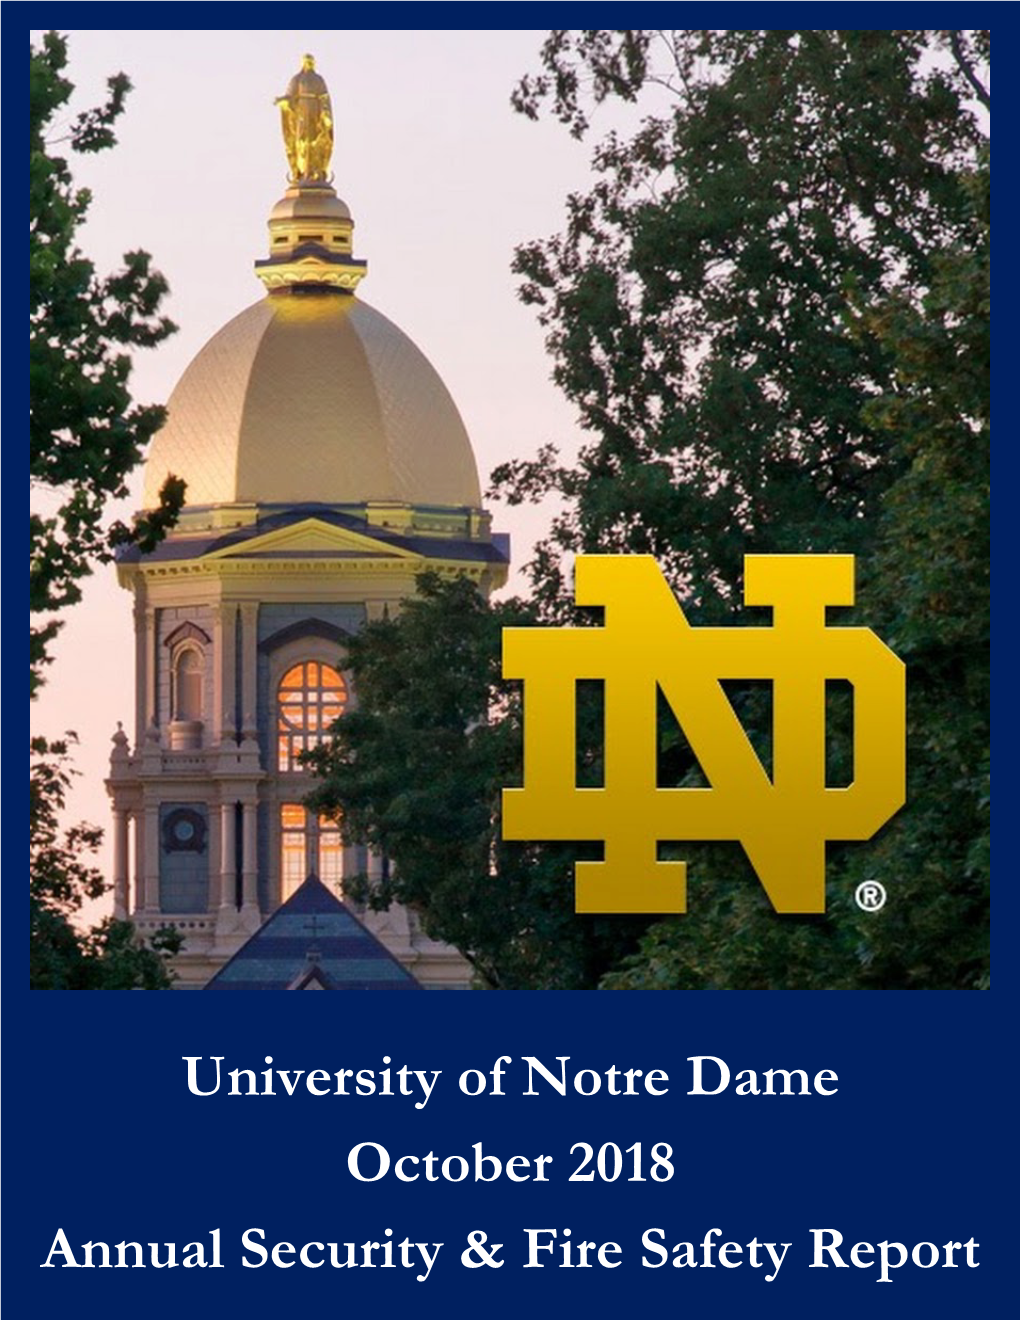 Campus to Achieve This Mission and Asks That Every Member of the Notre Dame Community Take Responsibility for Their Own Safety and the Safety of Those Around Them